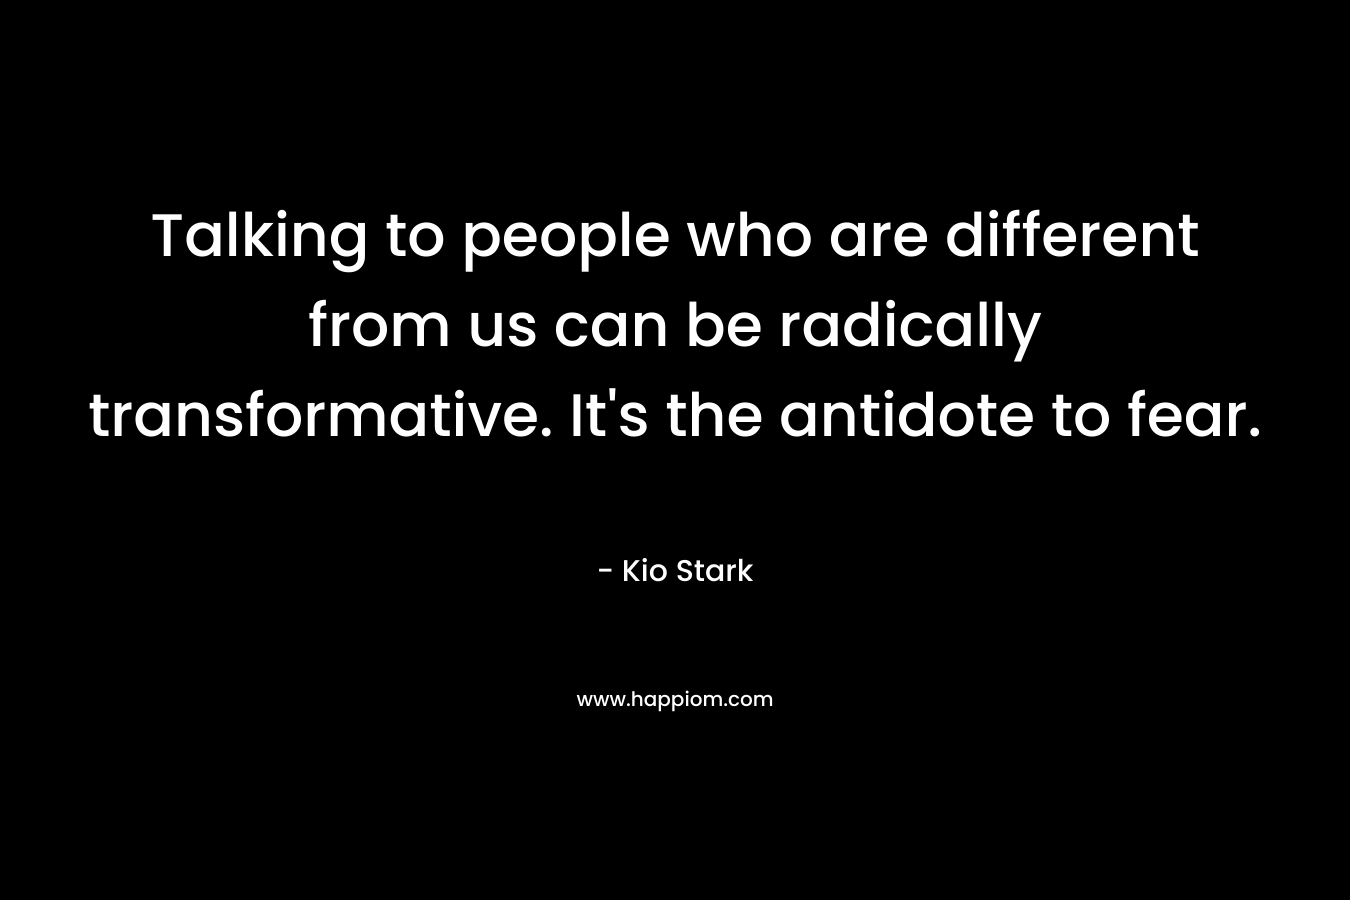 Talking to people who are different from us can be radically transformative. It’s the antidote to fear. – Kio Stark